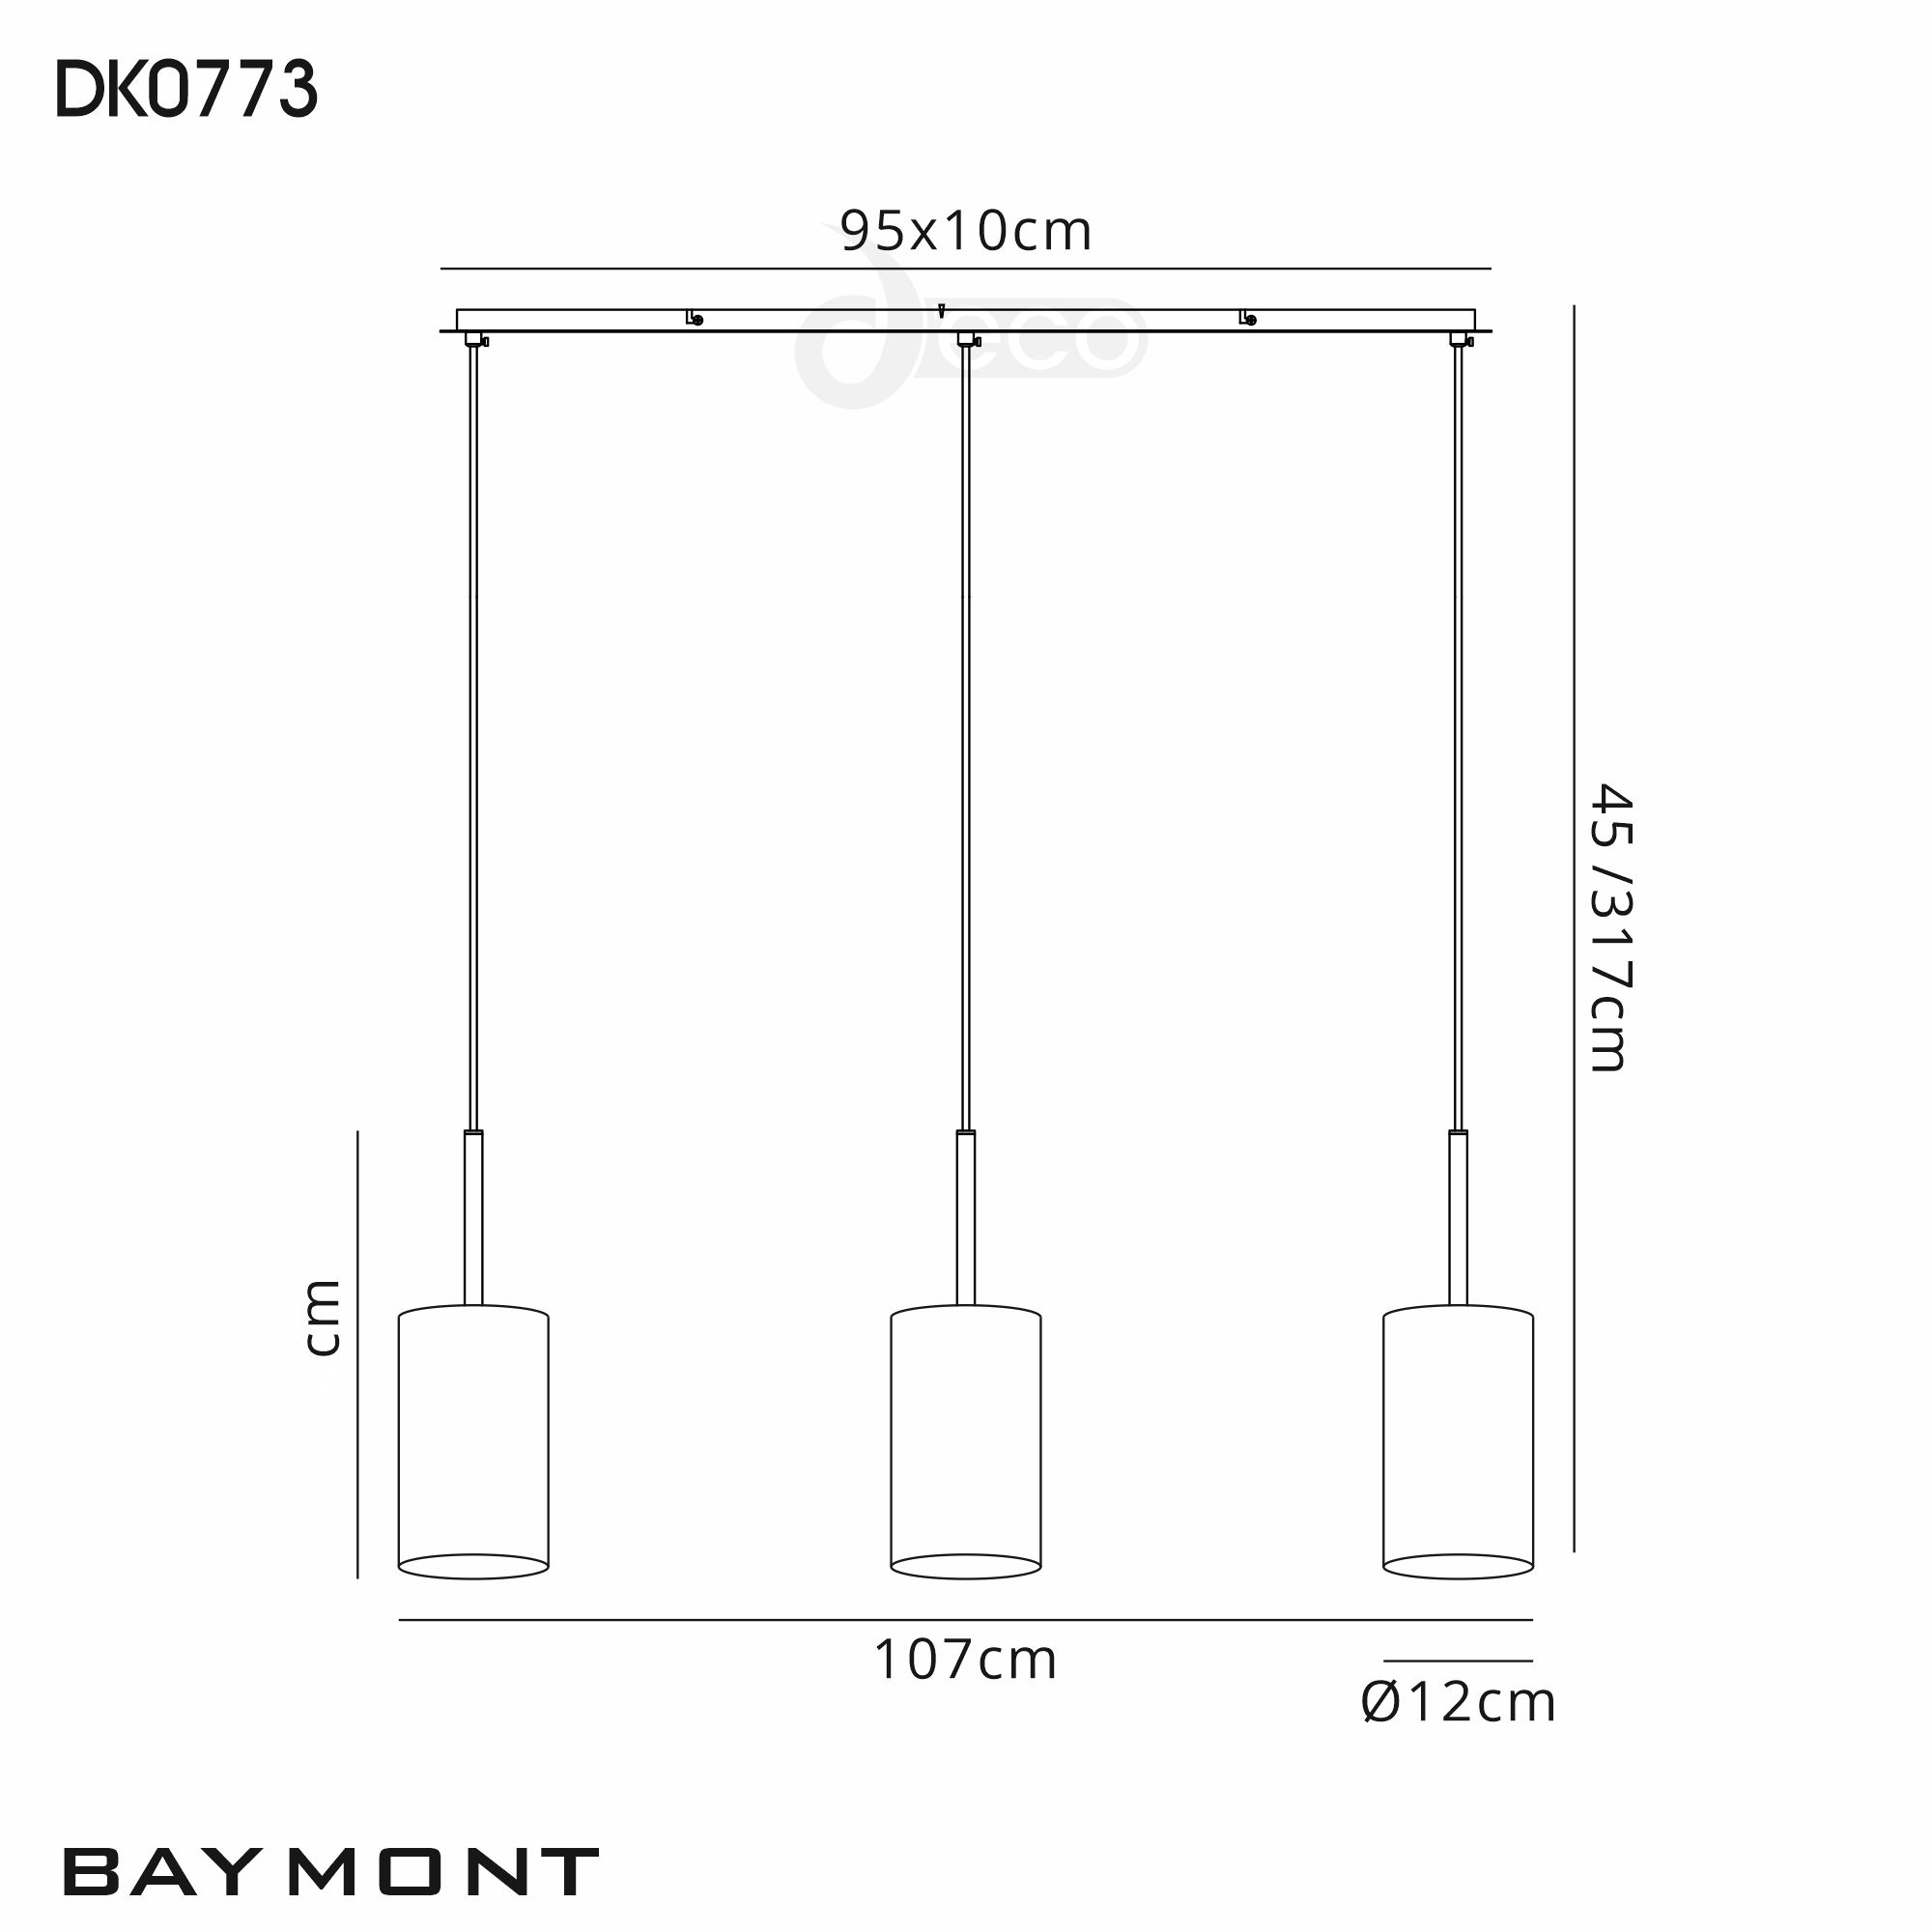 Baymont AB BL Ceiling Lights Deco Linear Fittings